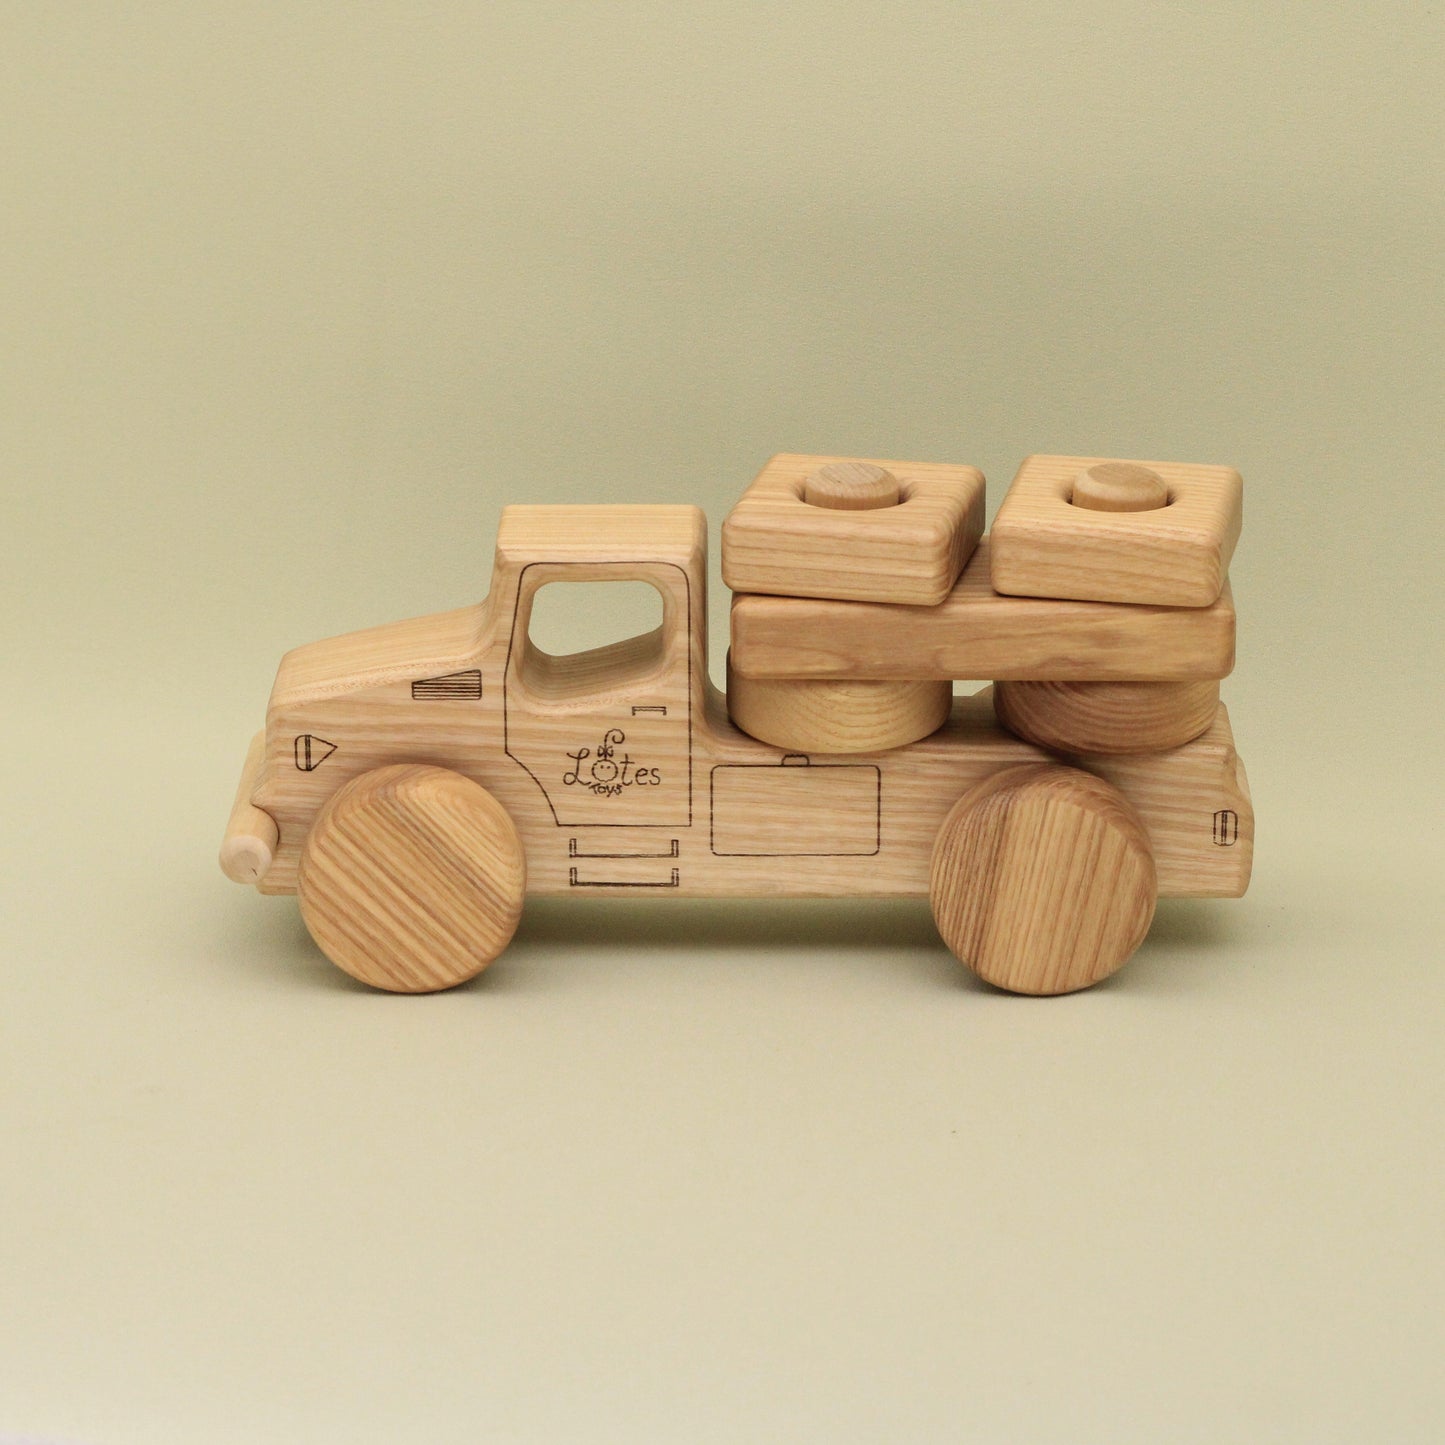 Lotes Toys Wooden Construction Vehicles Car BT51